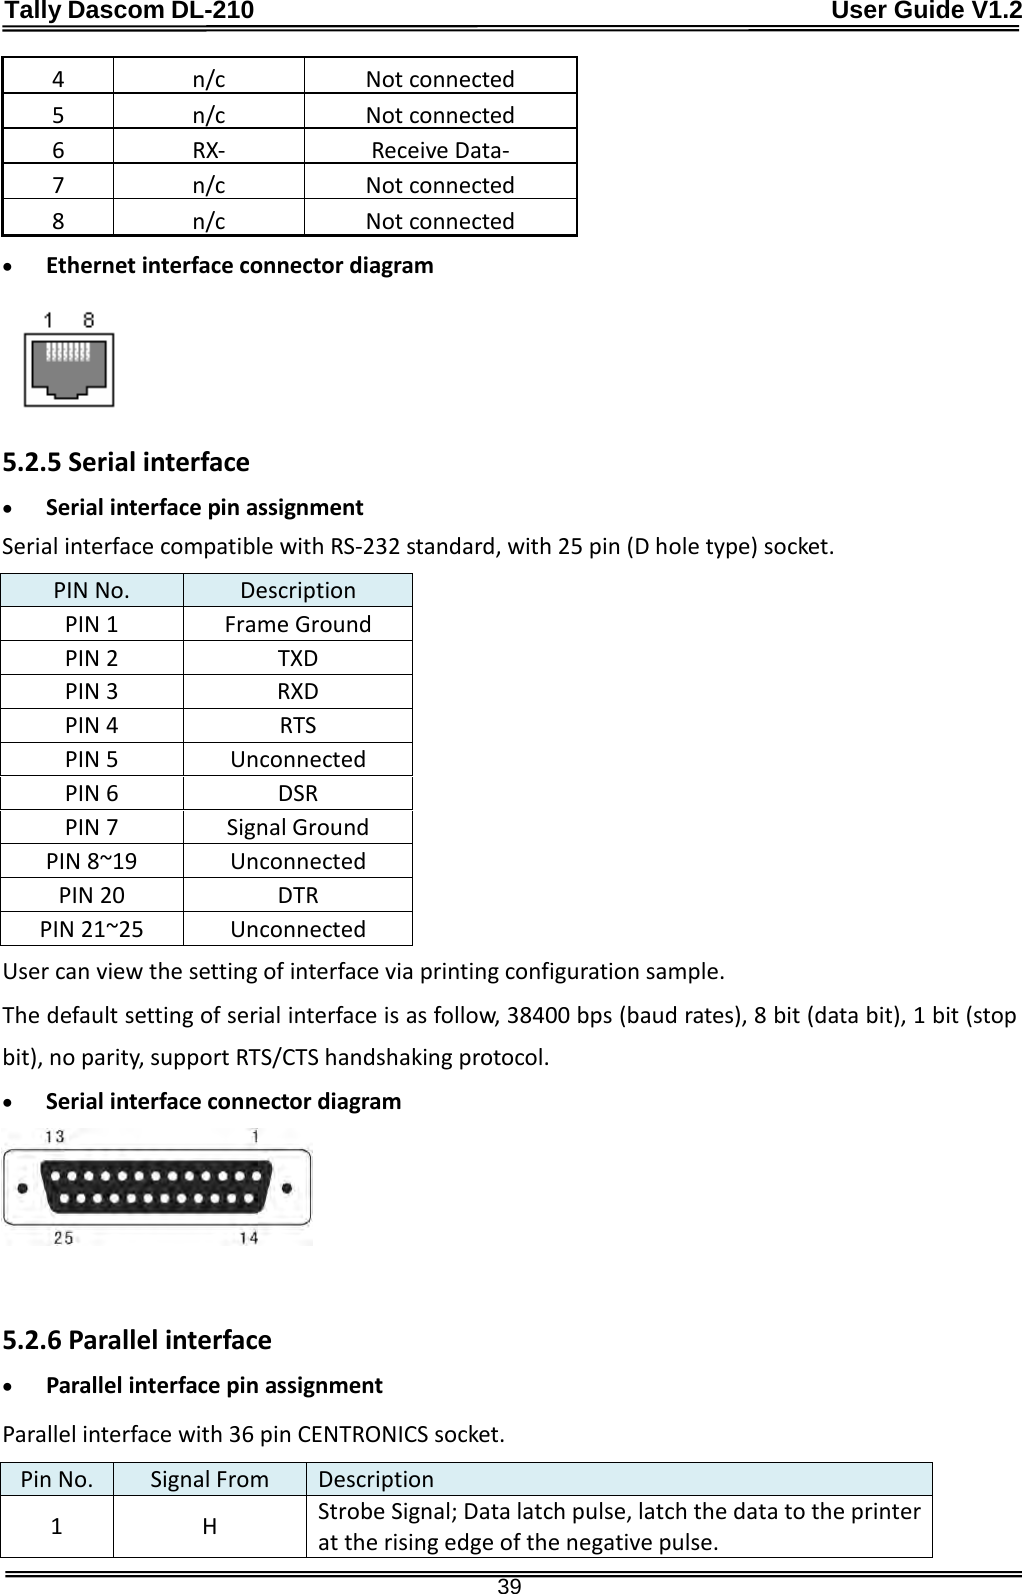 Tally Dascom DL-210                                              User Guide V1.2  39 4  n/c Not connected 5  n/c Not connected 6  RX-  Receive Data- 7  n/c Not connected 8  n/c Not connected • Ethernet interface connector diagram  5.2.5 Serial interface • Serial interface pin assignment   Serial interface compatible with RS-232 standard, with 25 pin (D hole type) socket. PIN No. Description PIN 1 Frame Ground PIN 2 TXD PIN 3 RXD PIN 4 RTS PIN 5 Unconnected PIN 6 DSR PIN 7 Signal Ground PIN 8~19 Unconnected PIN 20 DTR PIN 21~25 Unconnected User can view the setting of interface via printing configuration sample. The default setting of serial interface is as follow, 38400 bps (baud rates), 8 bit (data bit), 1 bit (stop bit), no parity, support RTS/CTS handshaking protocol. • Serial interface connector diagram    5.2.6 Parallel interface • Parallel interface pin assignment Parallel interface with 36 pin CENTRONICS socket.   Pin No. Signal From Description 1  H  Strobe Signal; Data latch pulse, latch the data to the printer at the rising edge of the negative pulse. 